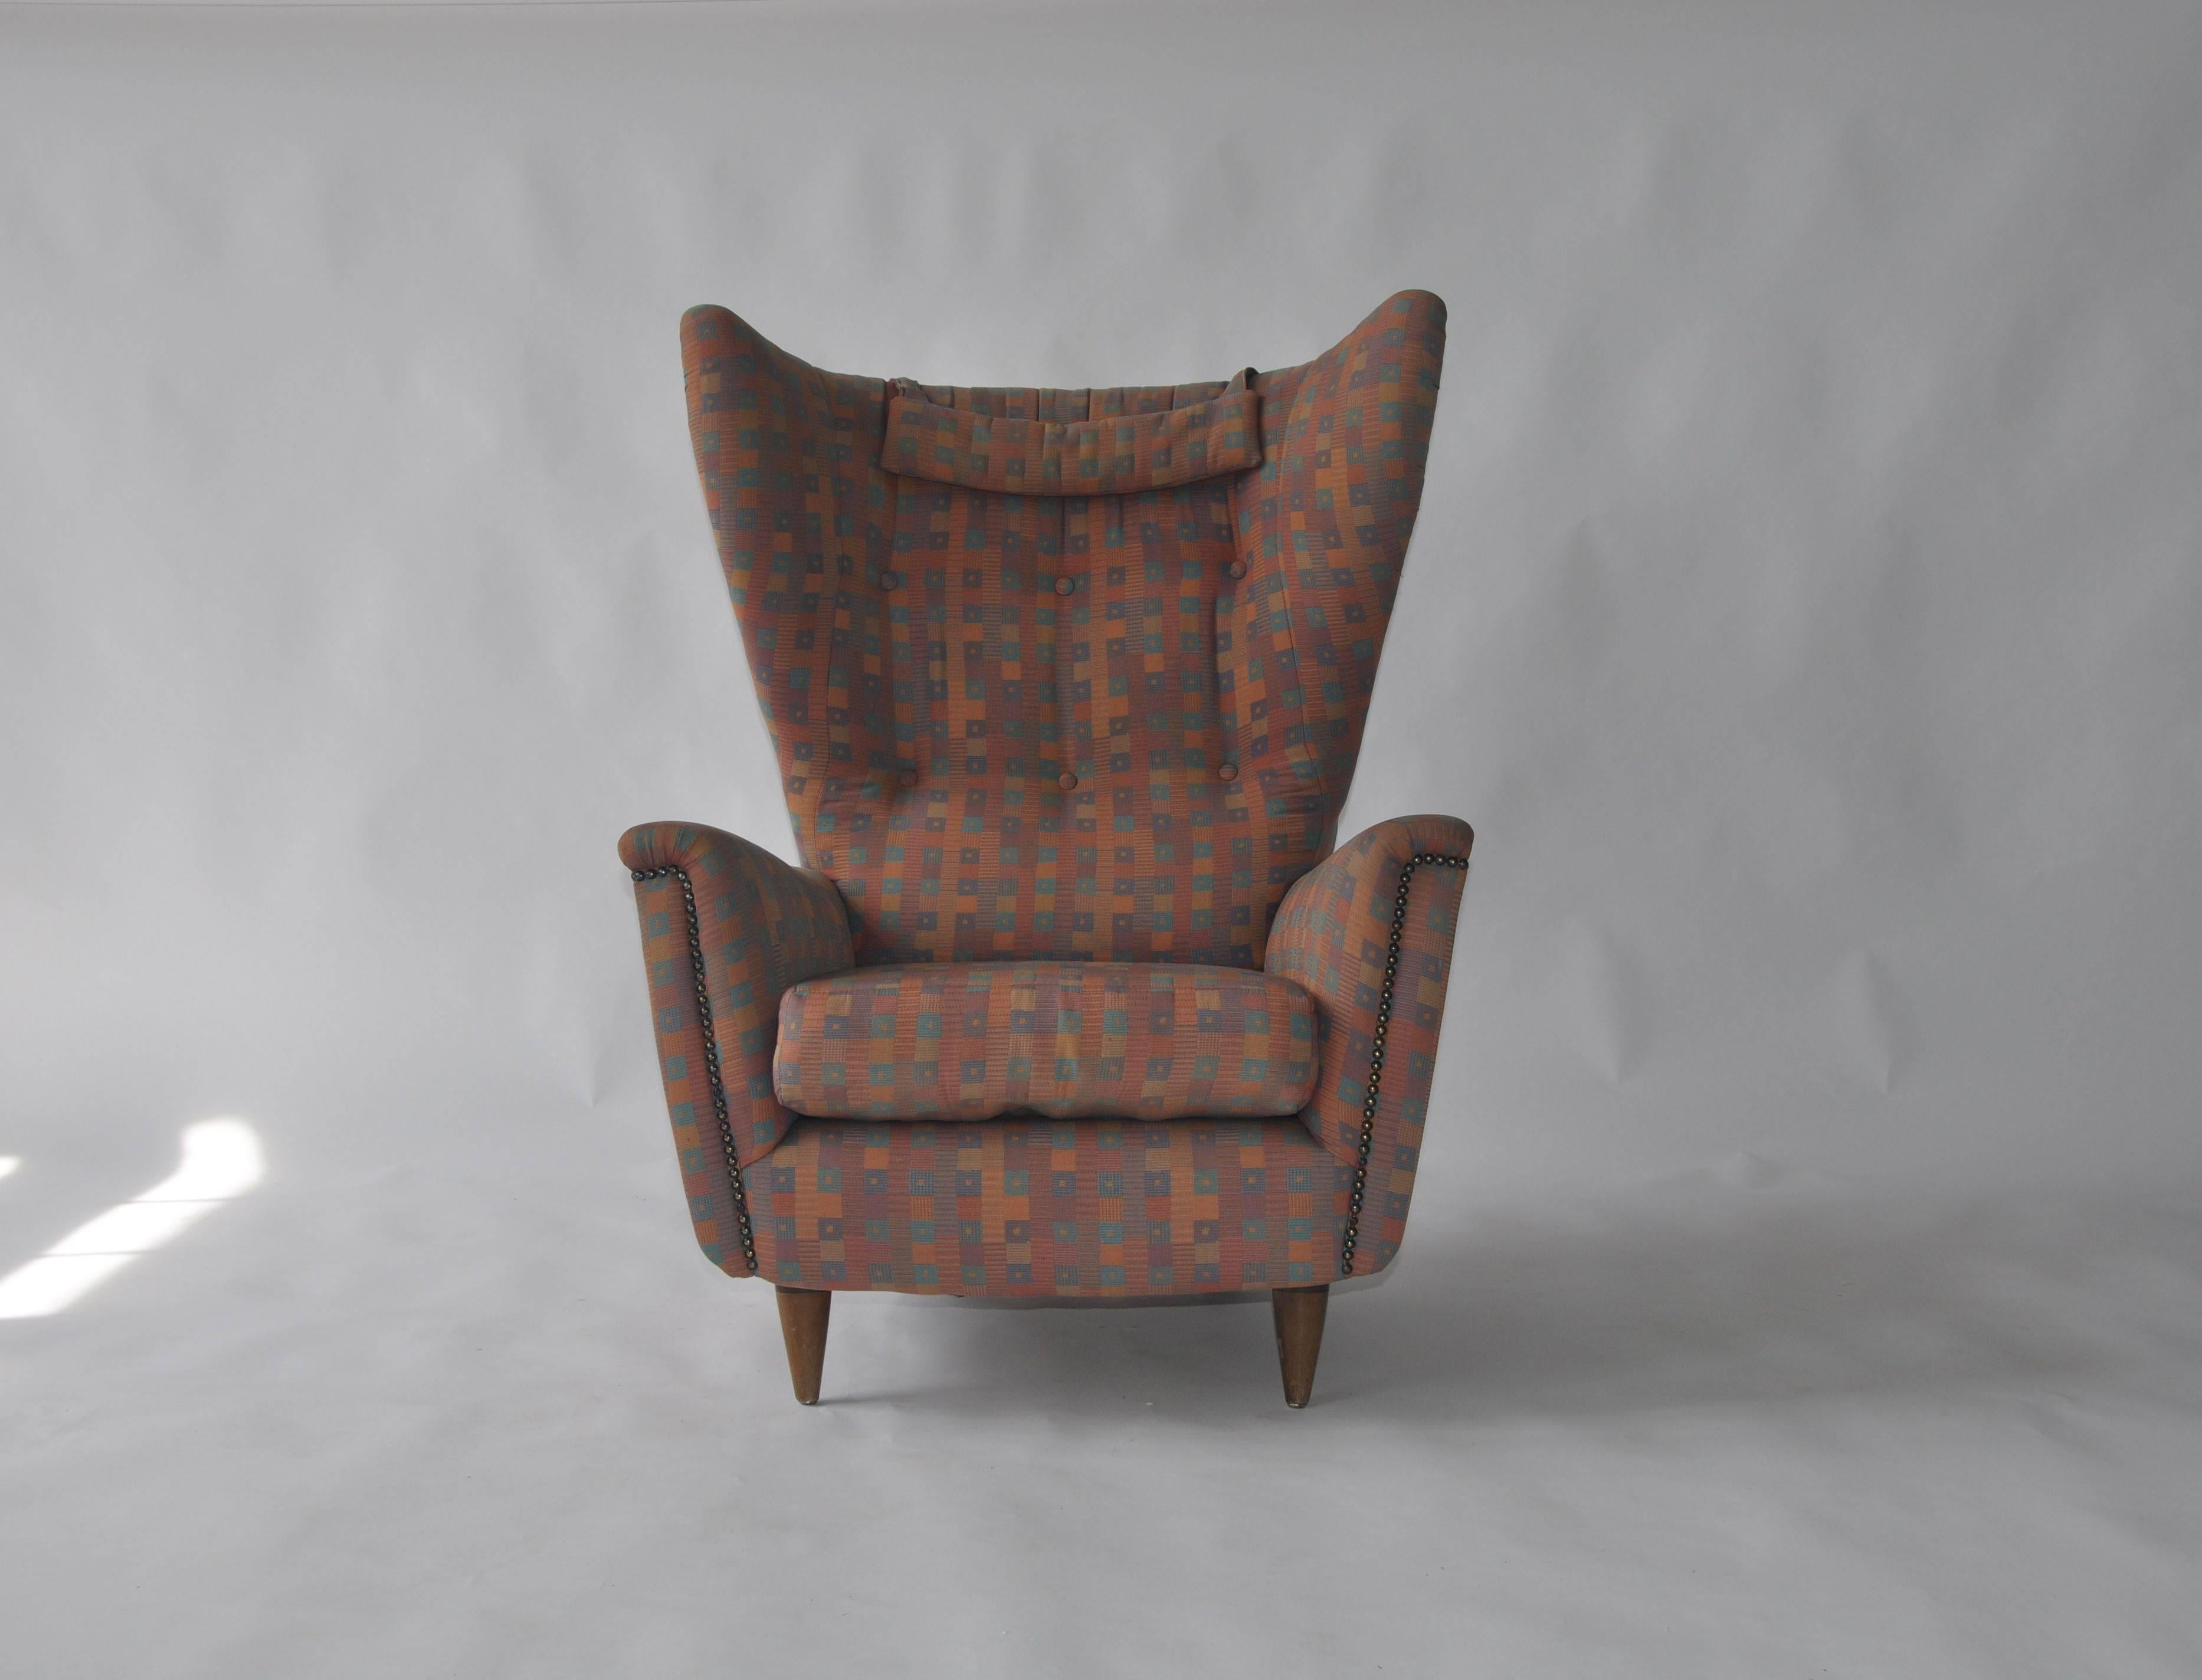 1950s wingback chair purchased in Denmark.